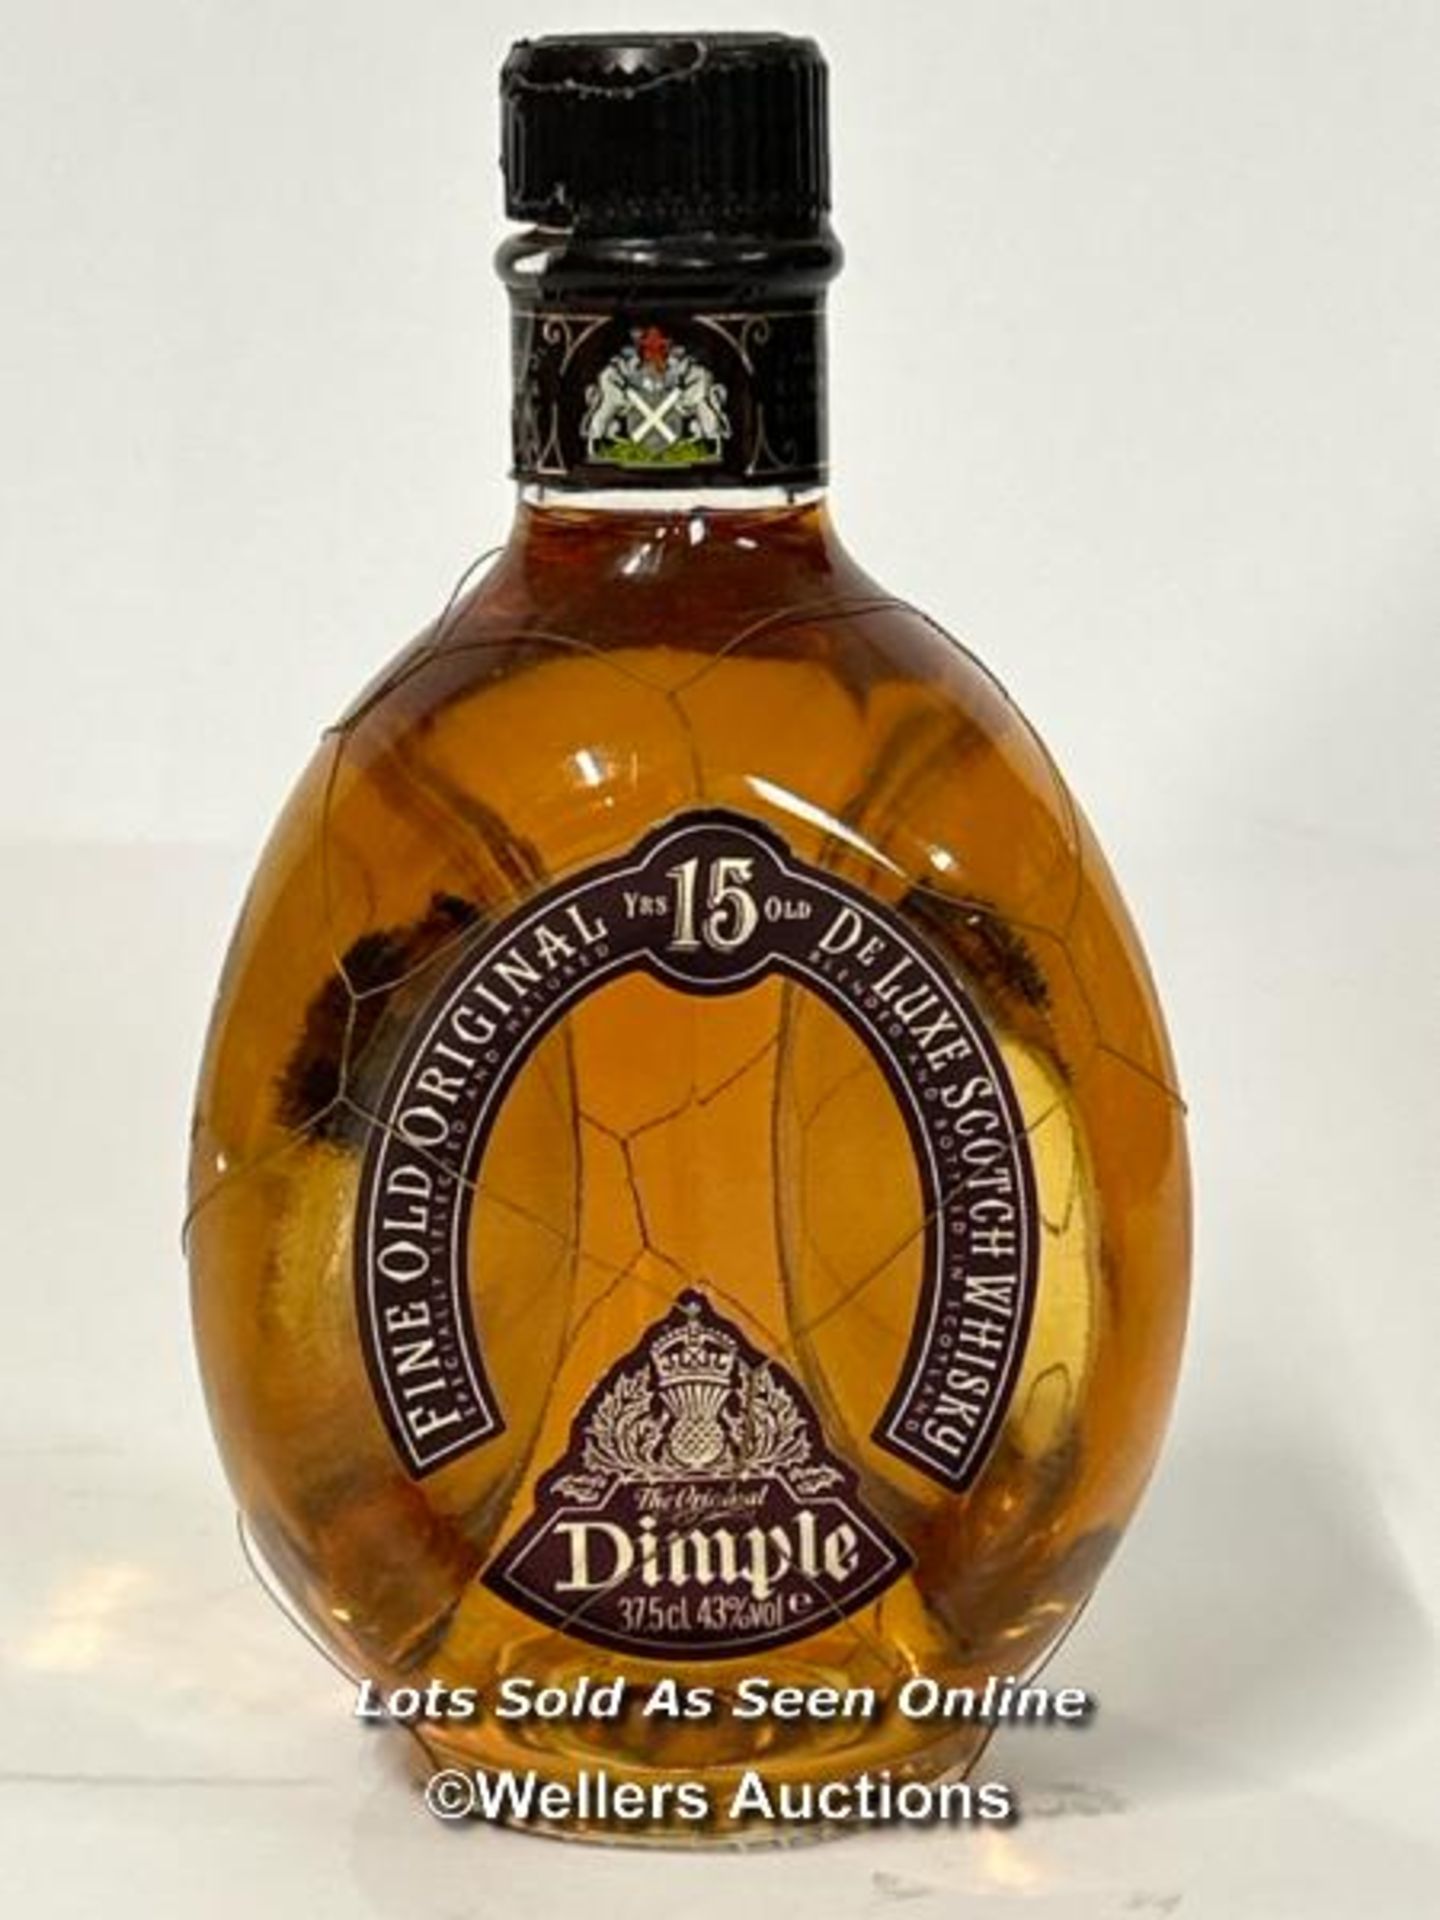 Dimple Haig 12yr whisky in decorative pewter bottle (opened) with a bottle of Dimple 15yr whisky, - Image 4 of 5